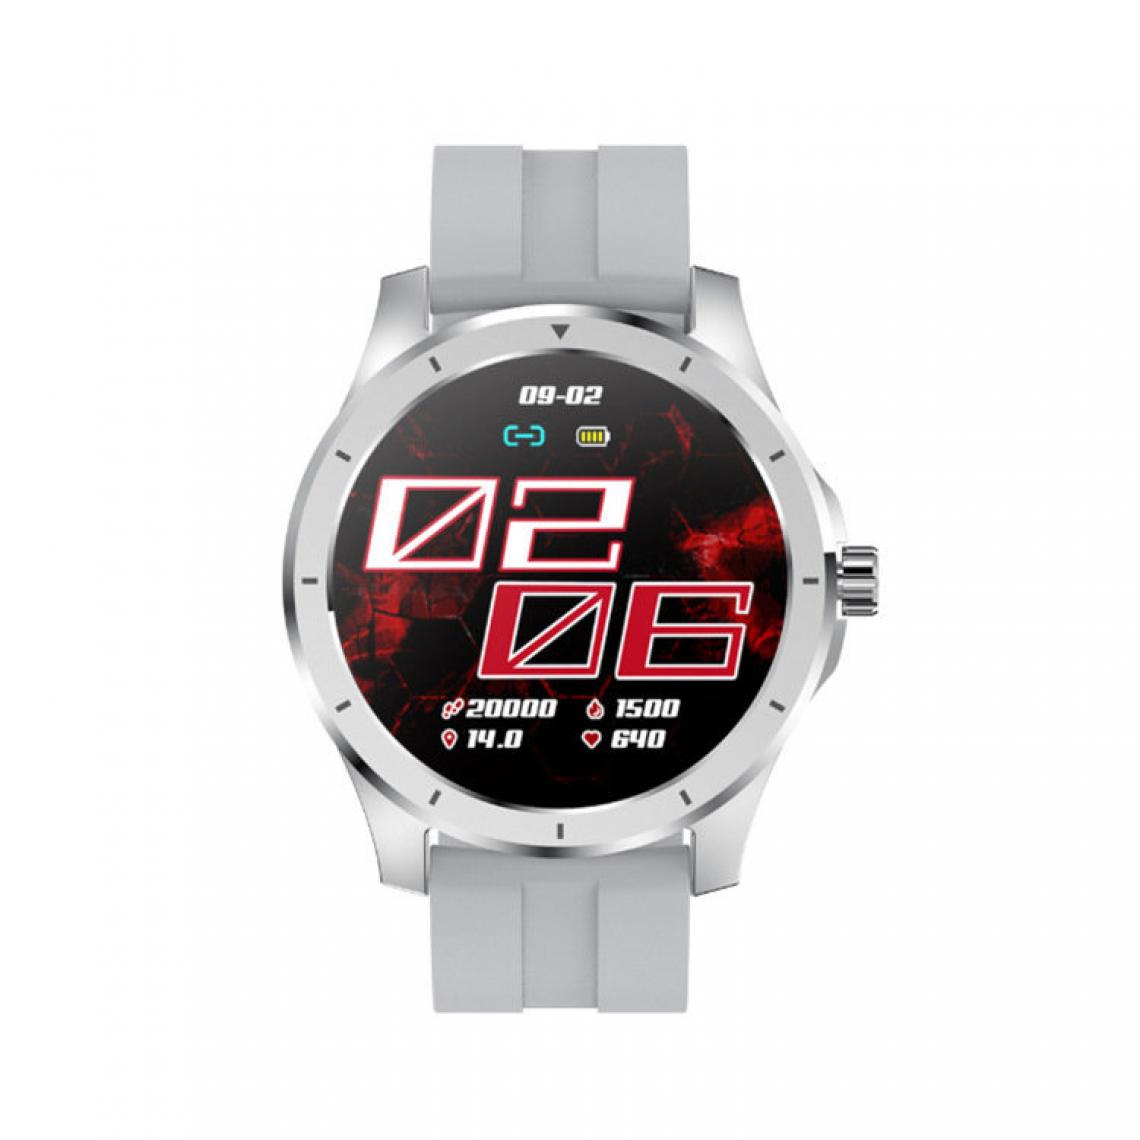 Chronotech Montres - Chronus Smart Watch with blood pressure monitoring, sleep detection, bluetooth call, local music storage, custom clock(silver) - Montre connectée